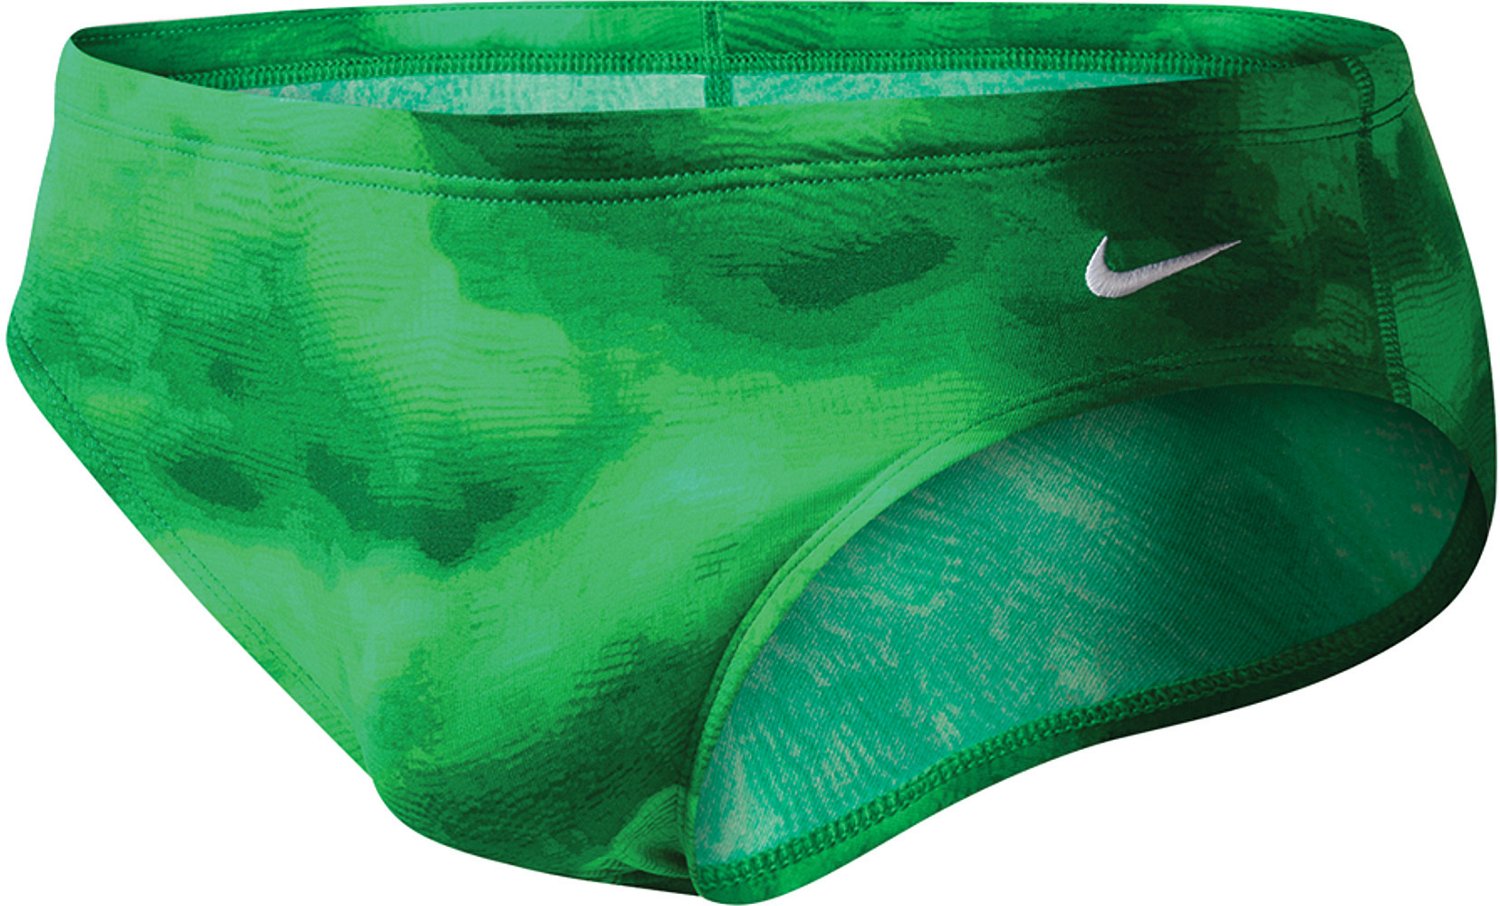 Swim Trunk at Academy Sports from Nike 